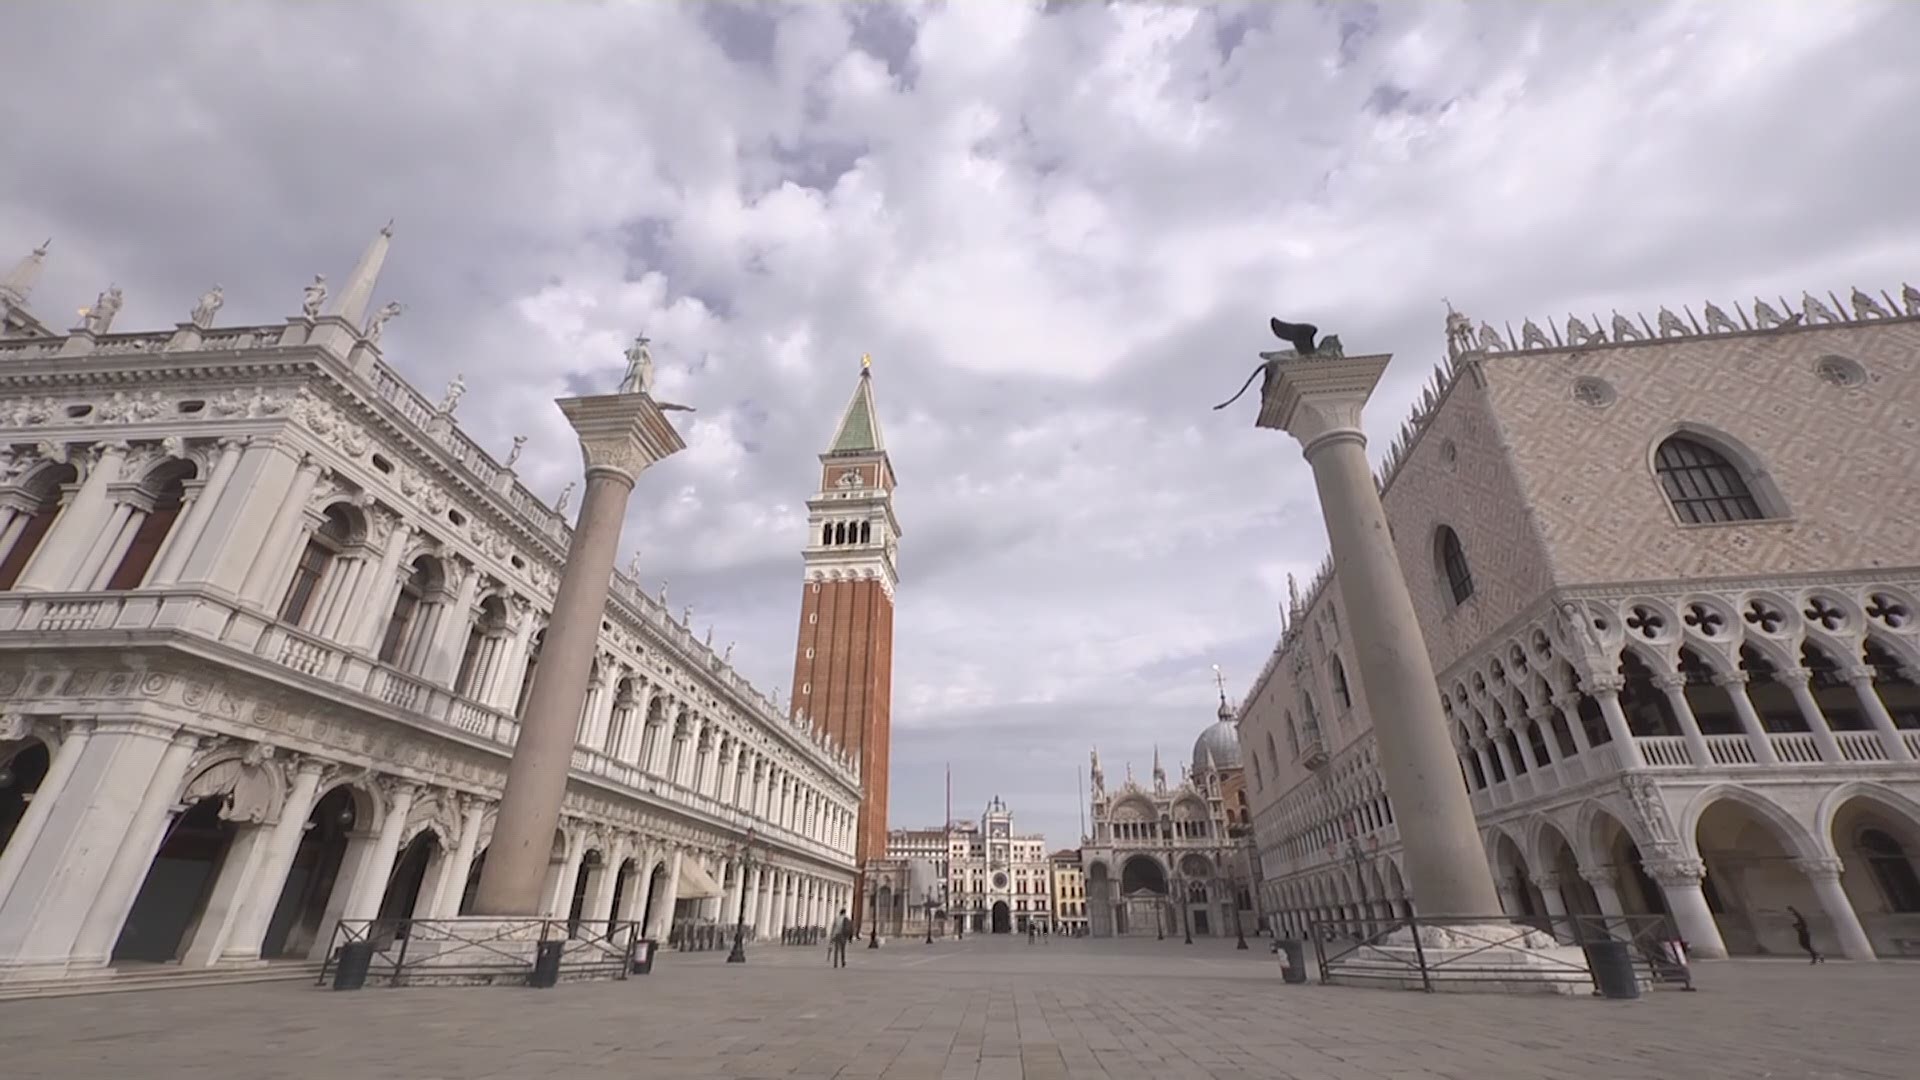 After three months of near-total lockdown, Venice, Italy appears unusually quiet - and clean. (Video from AP)